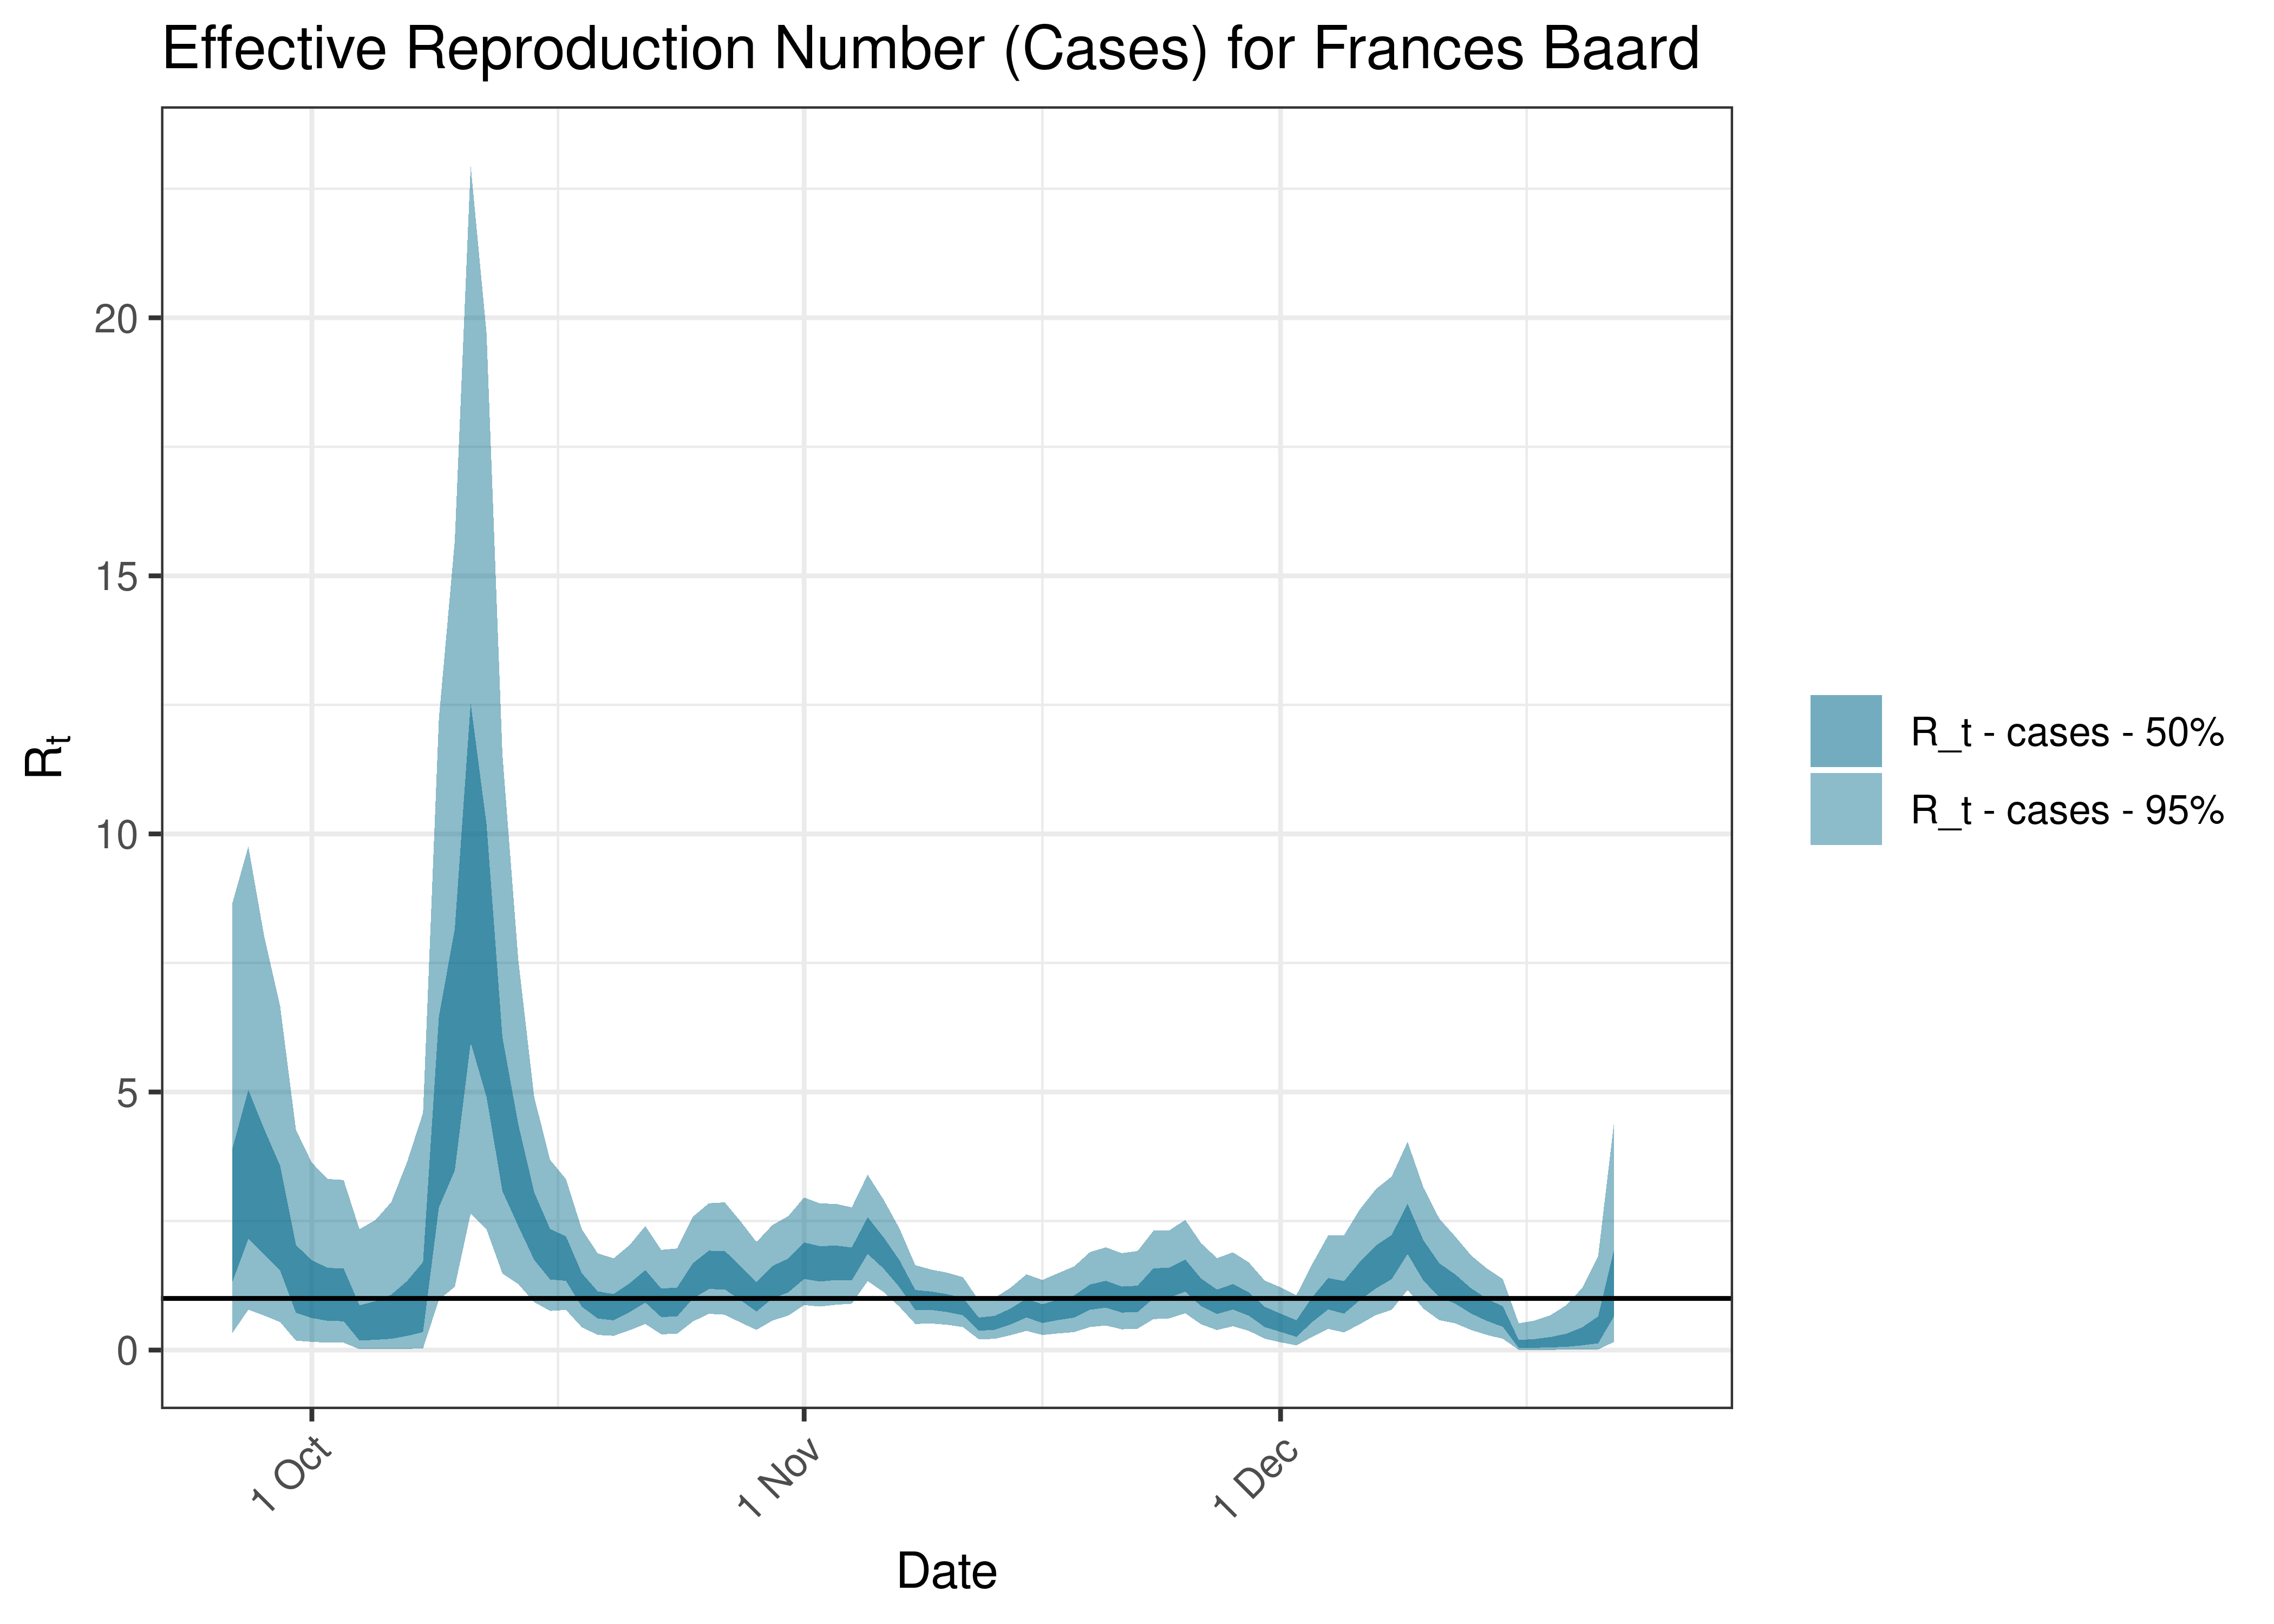 Estimated Effective Reproduction Number Based on Cases for Frances Baard over last 90 days